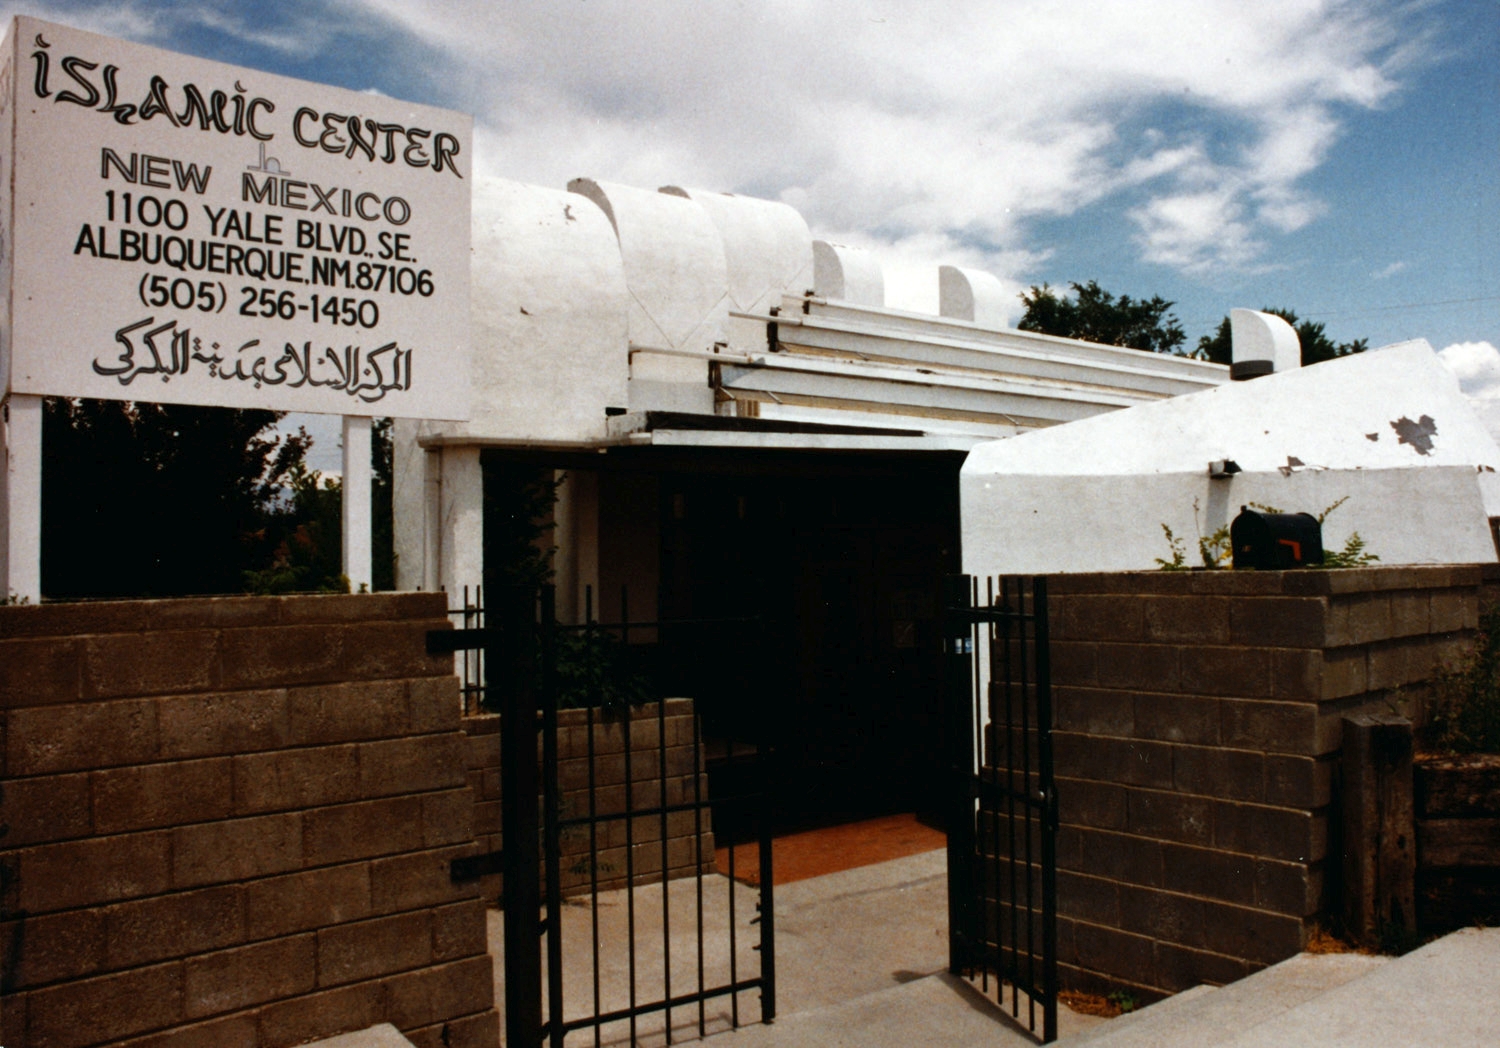 Entrance and Islamic Center sign